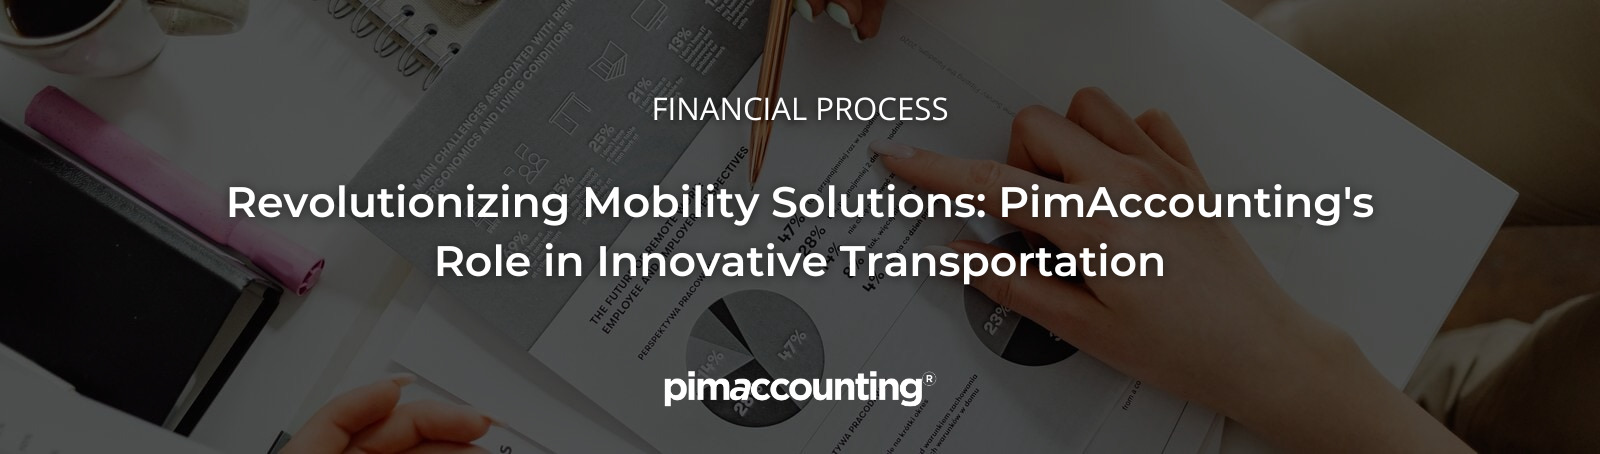 Revolutionizing Mobility Solutions: PimAccounting's Role in Innovative Transportation